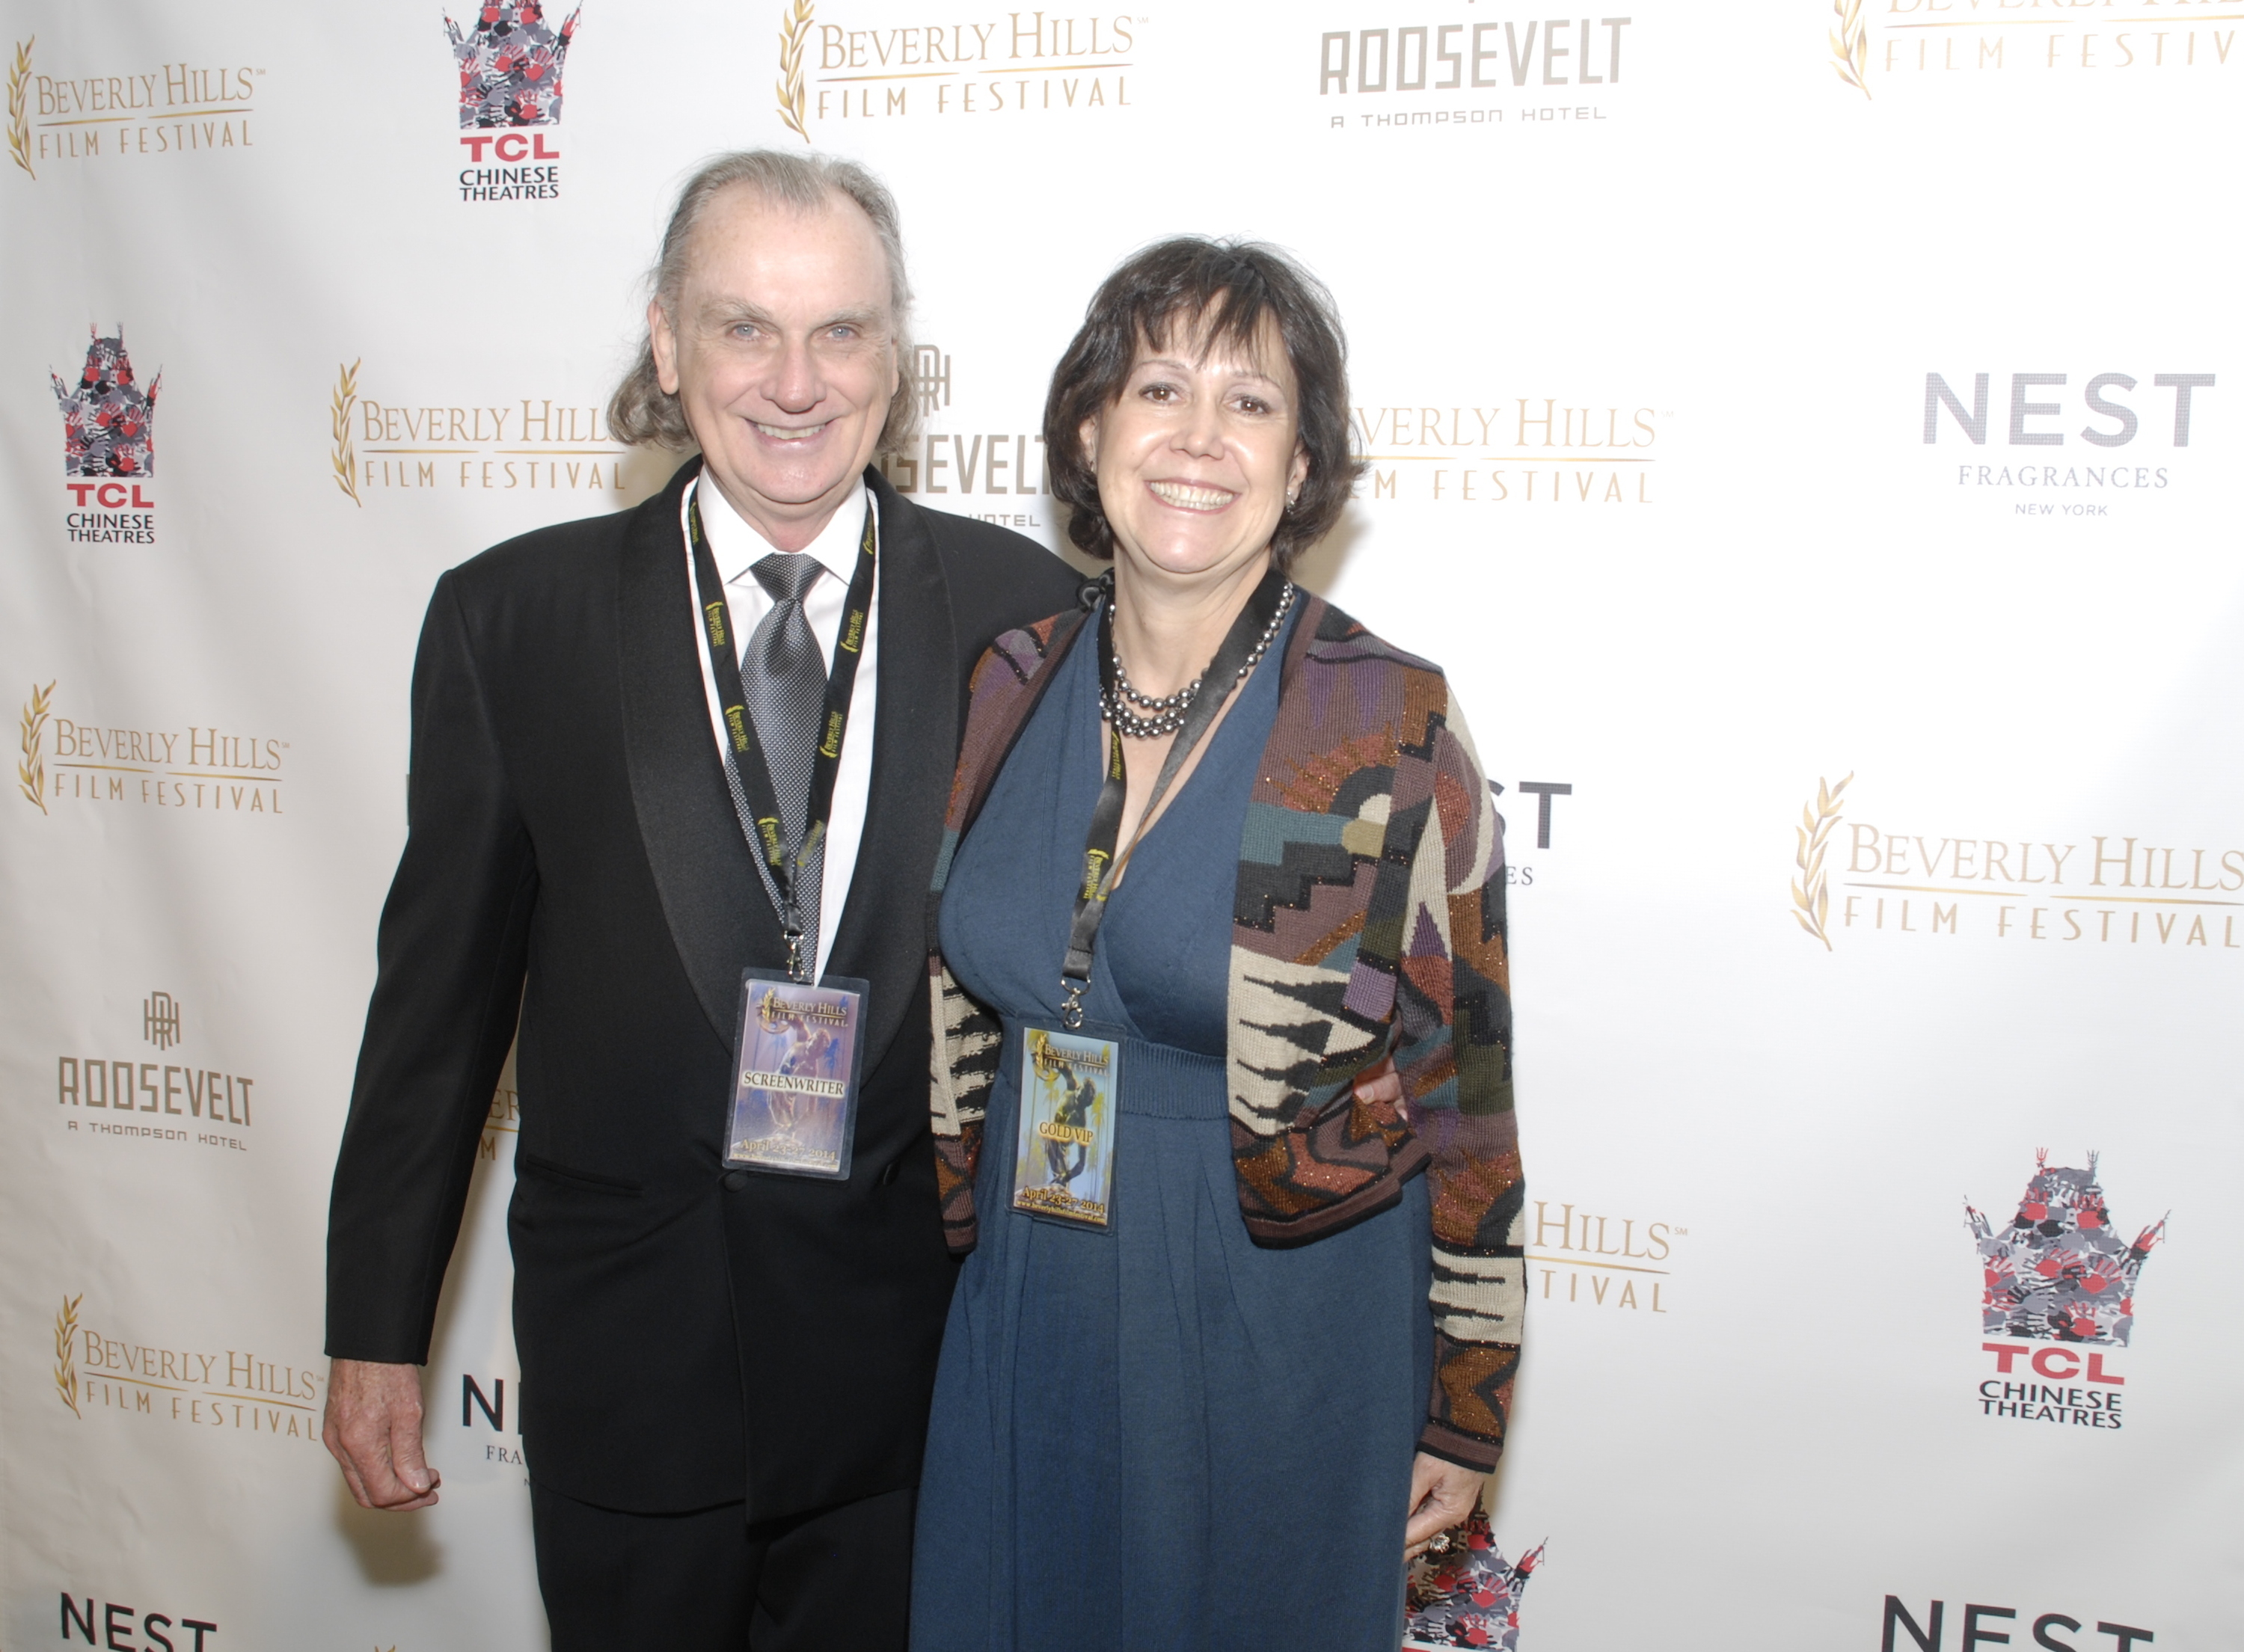 With Lesley Lillywhite, 2014 Beverly Hills Film Festival